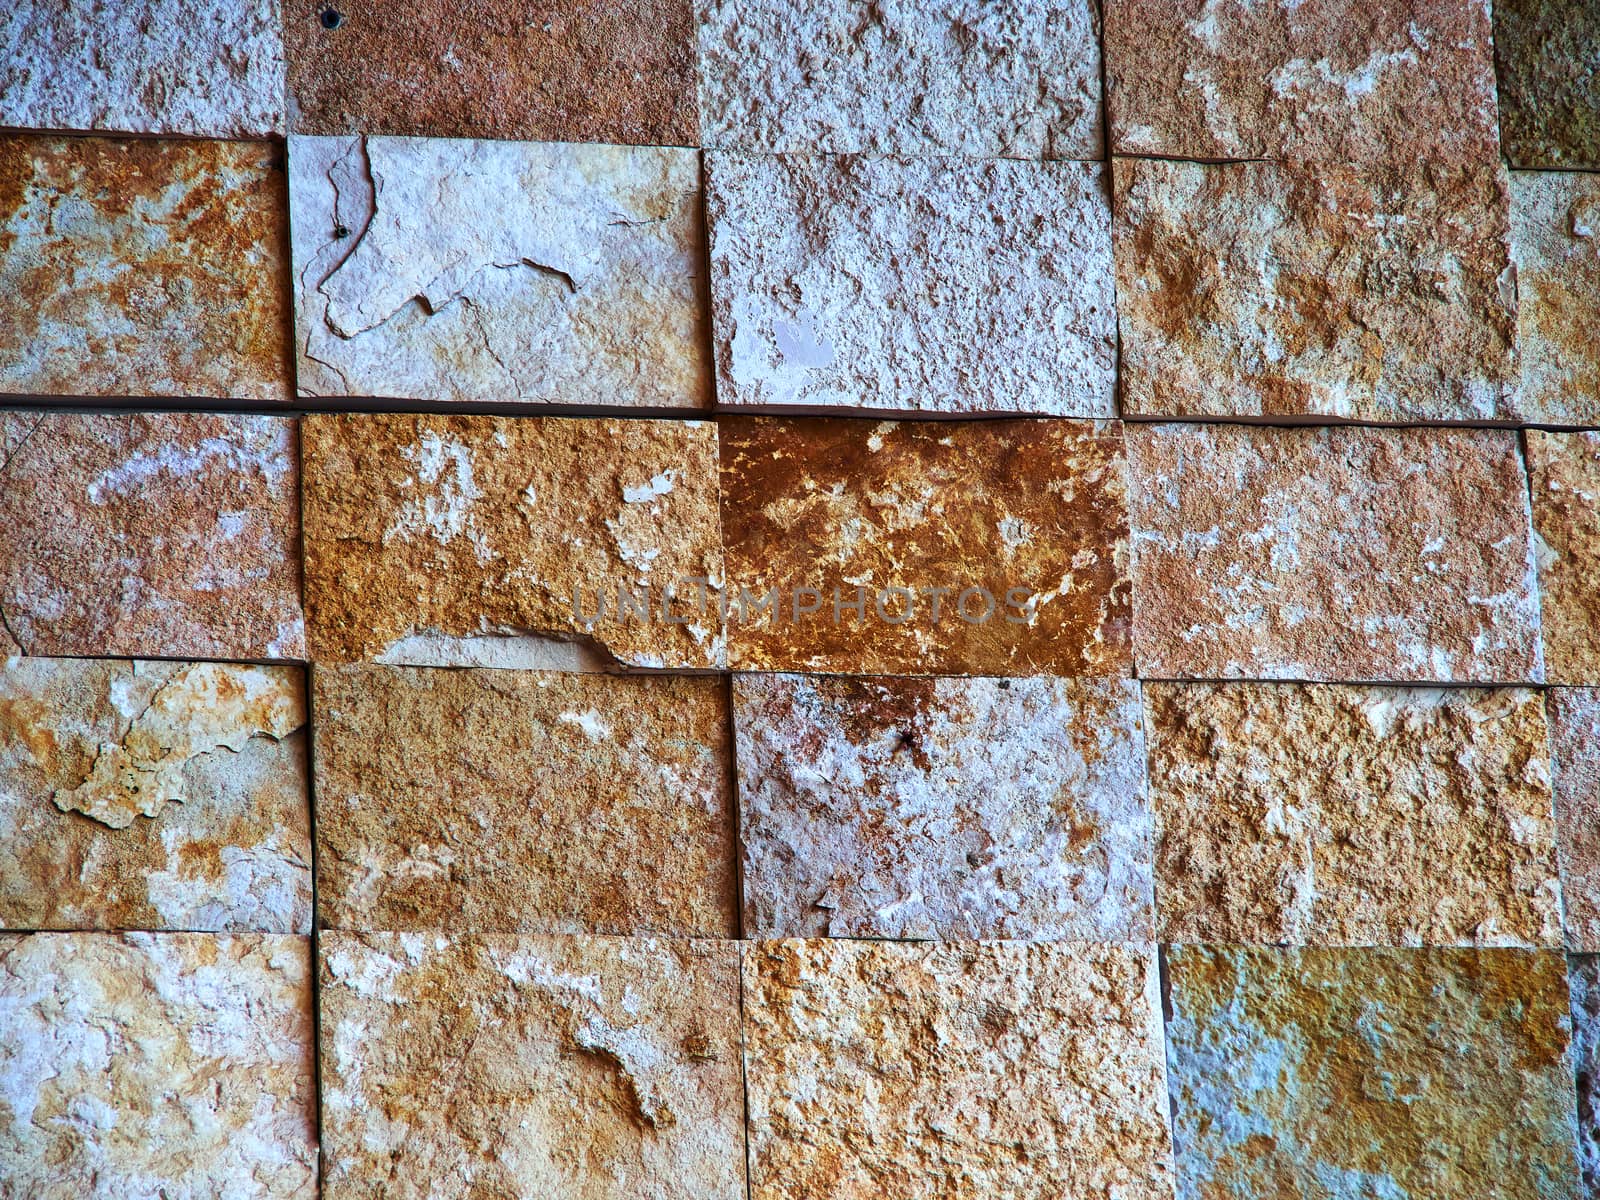 Details of decorative stone wall in light earth colors